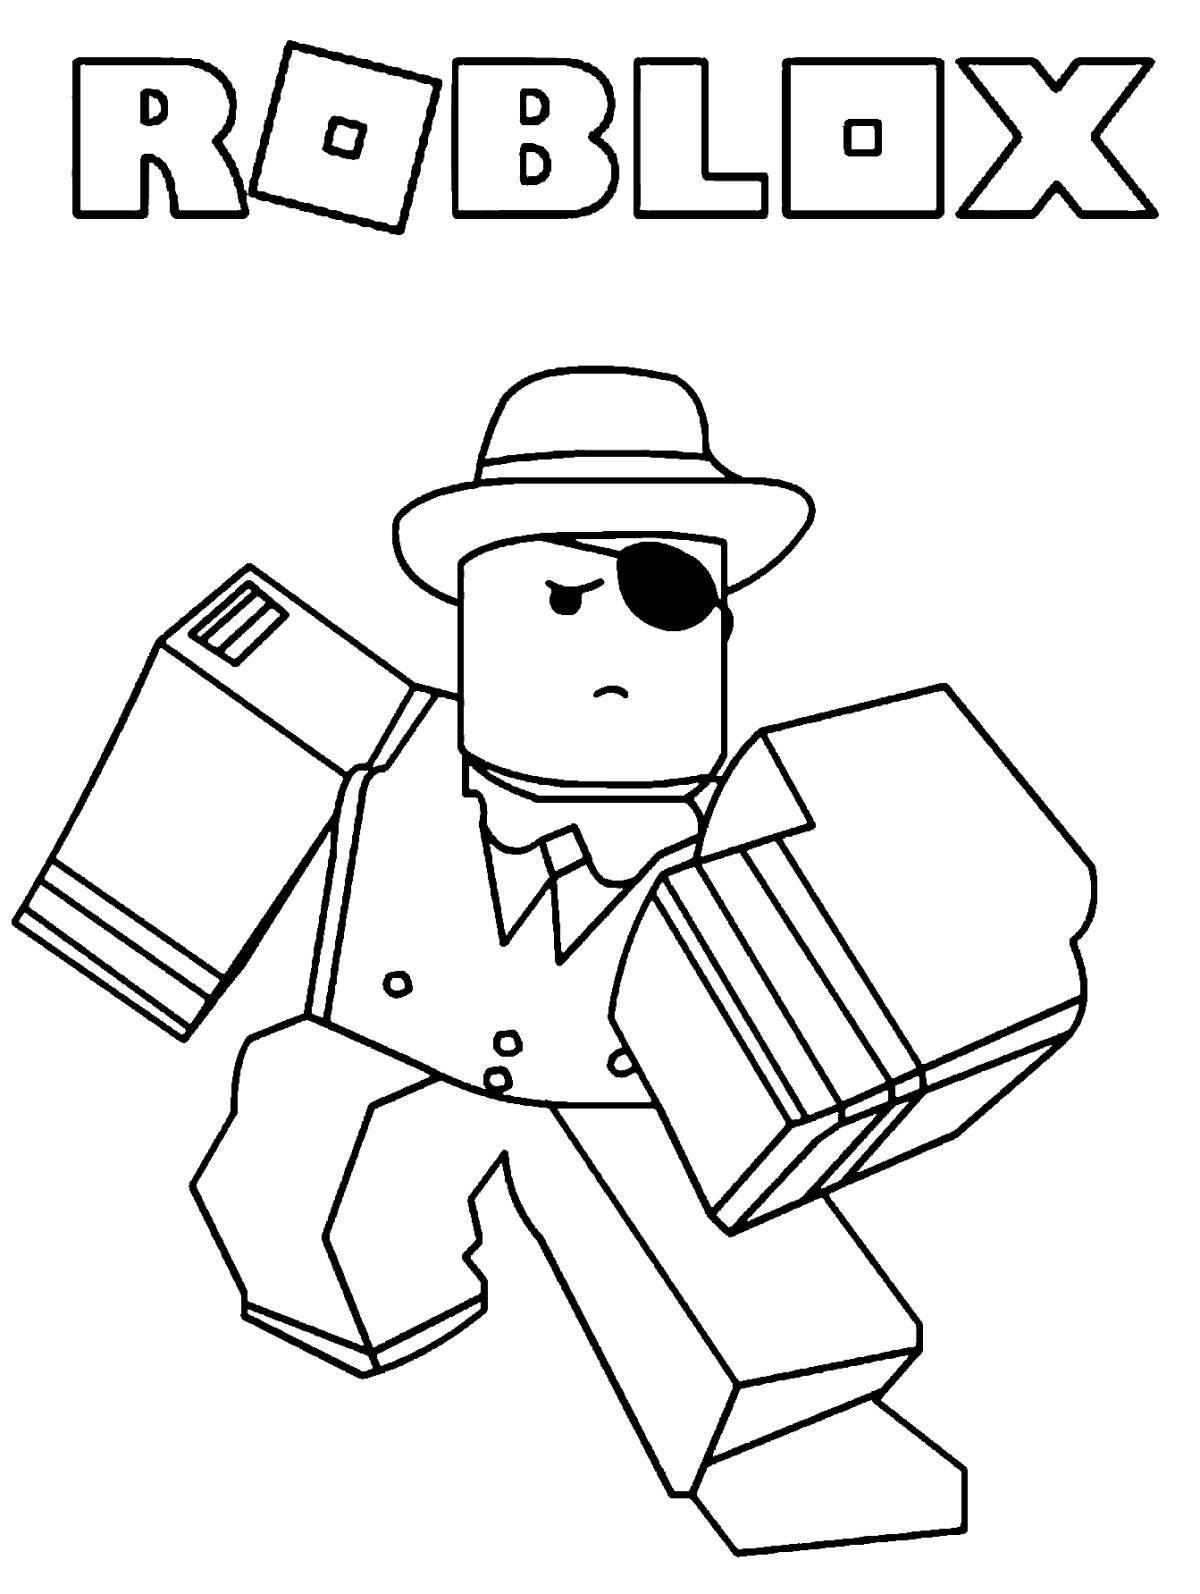 Roblox by numbers coloring book with rich colors